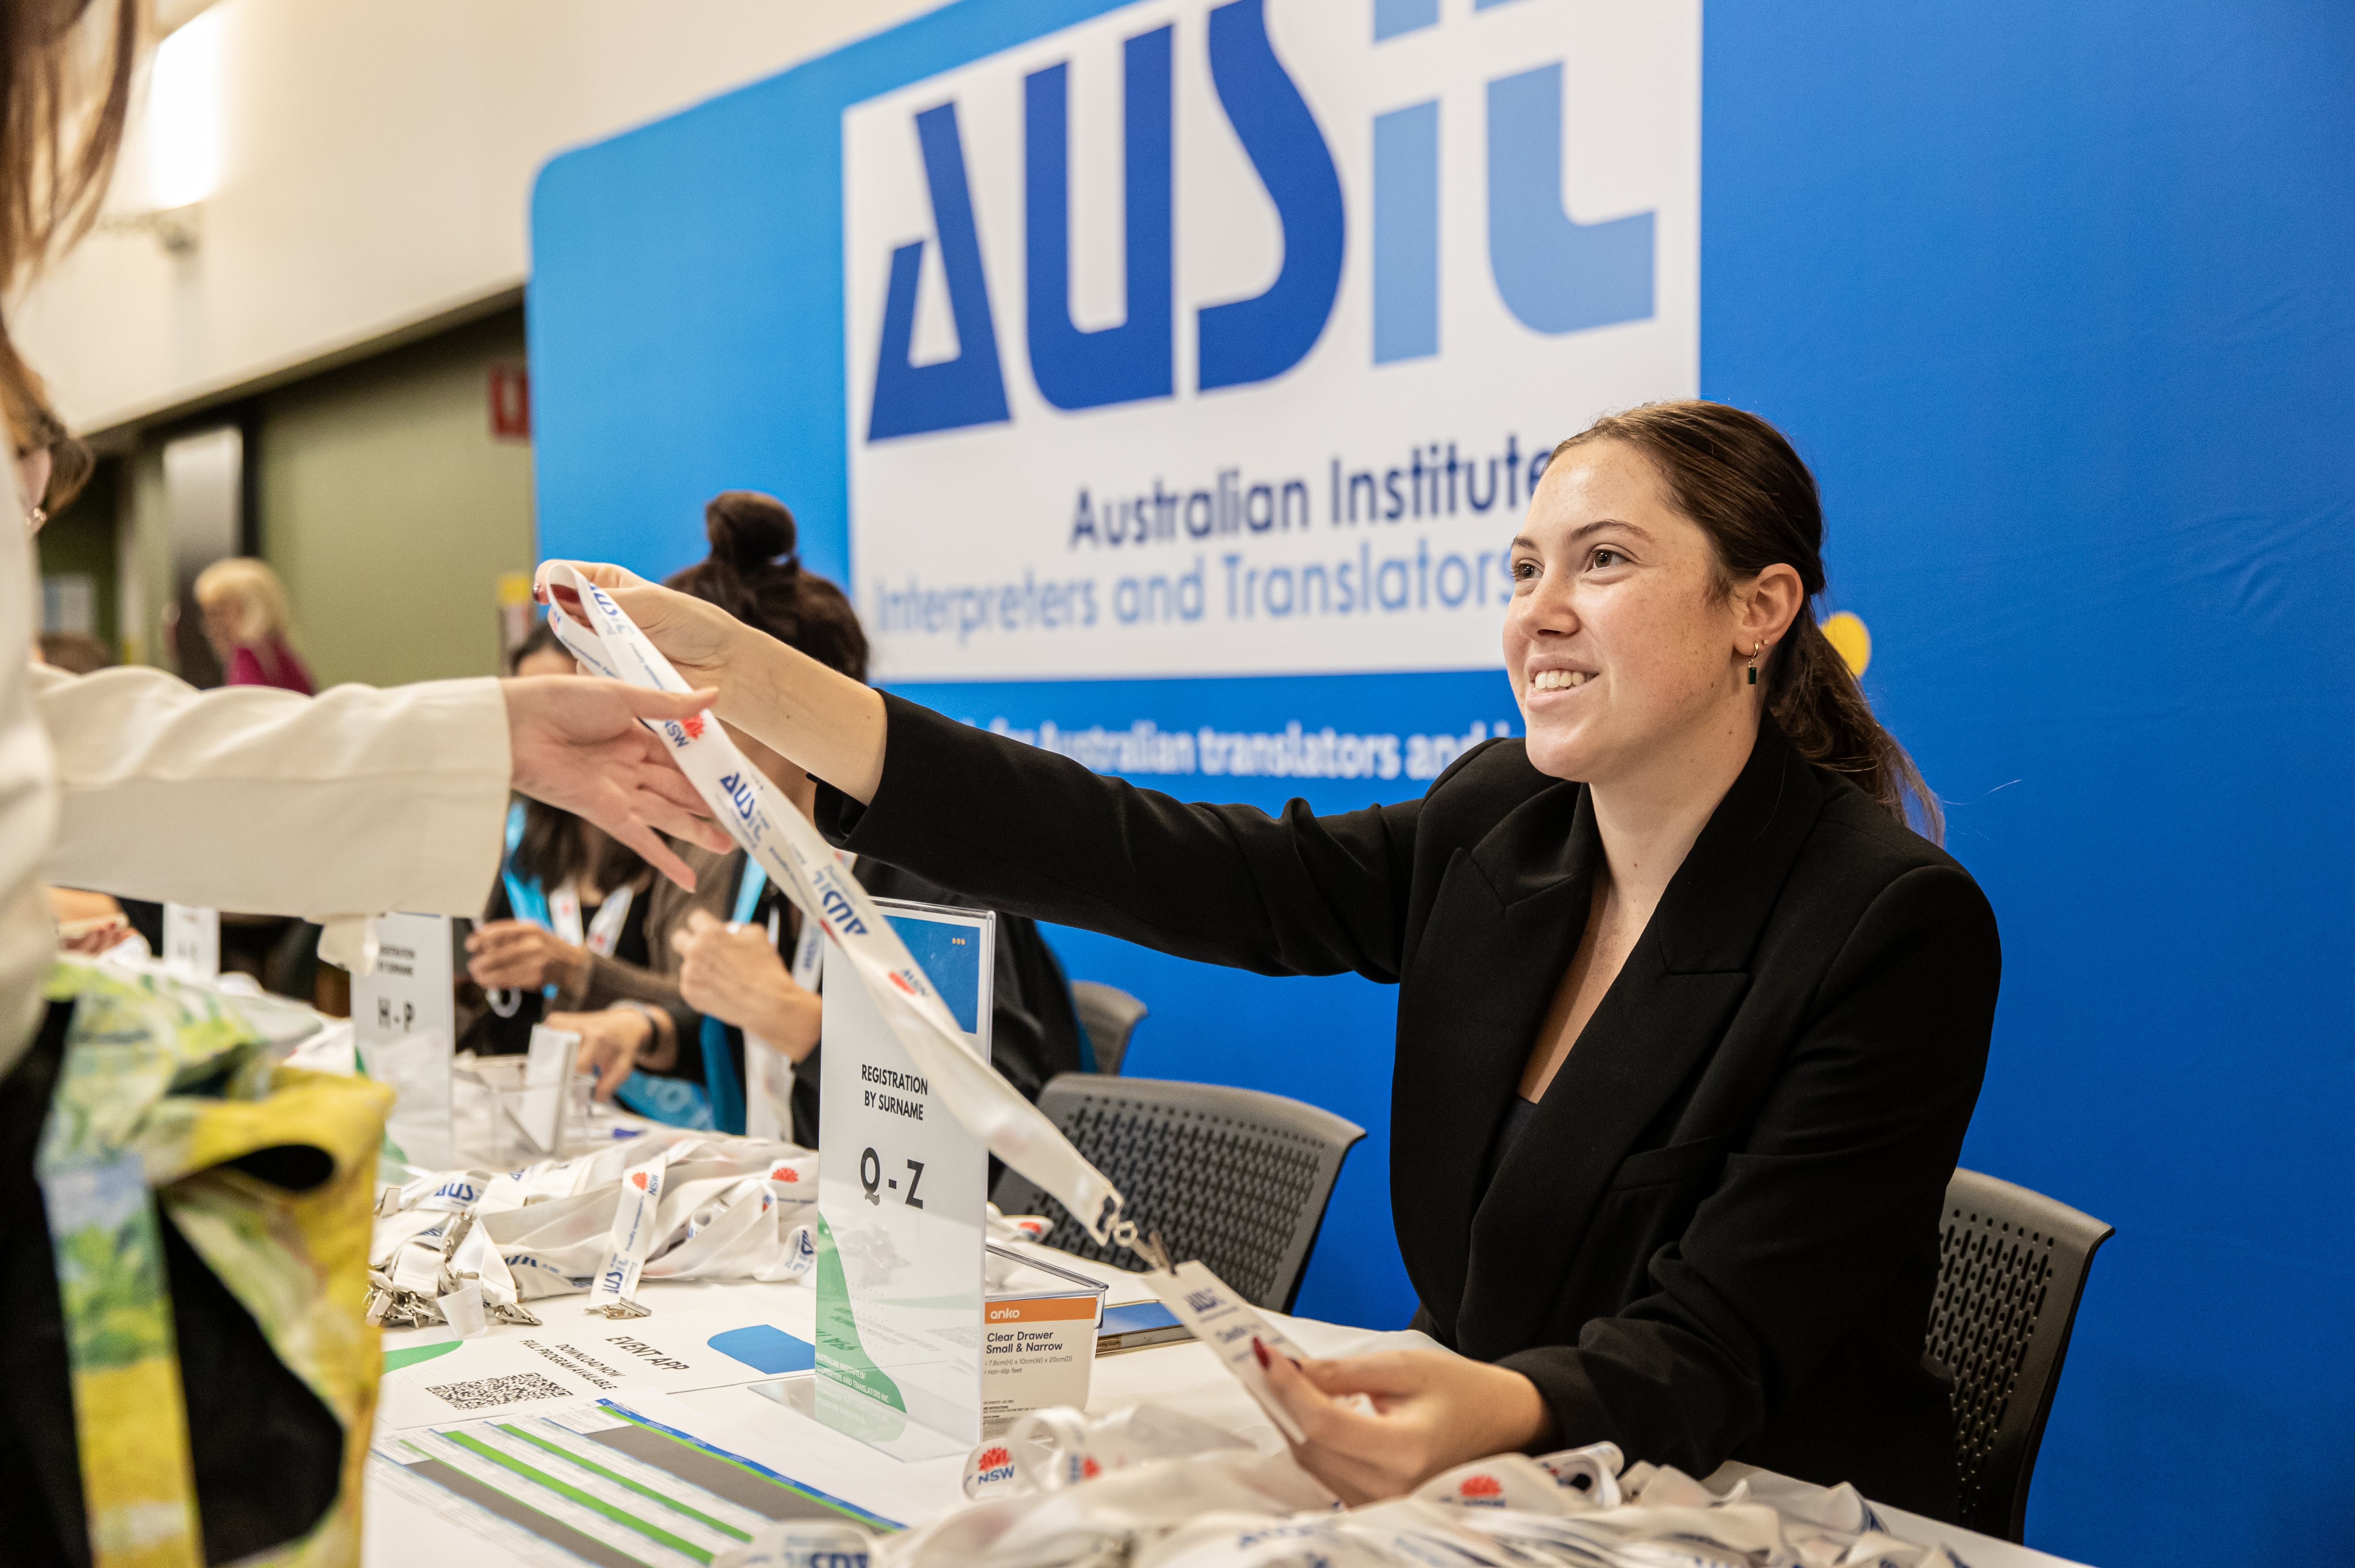 Event Staff Issuing Lanyard to Delegate at AUSIT Conference Sydney